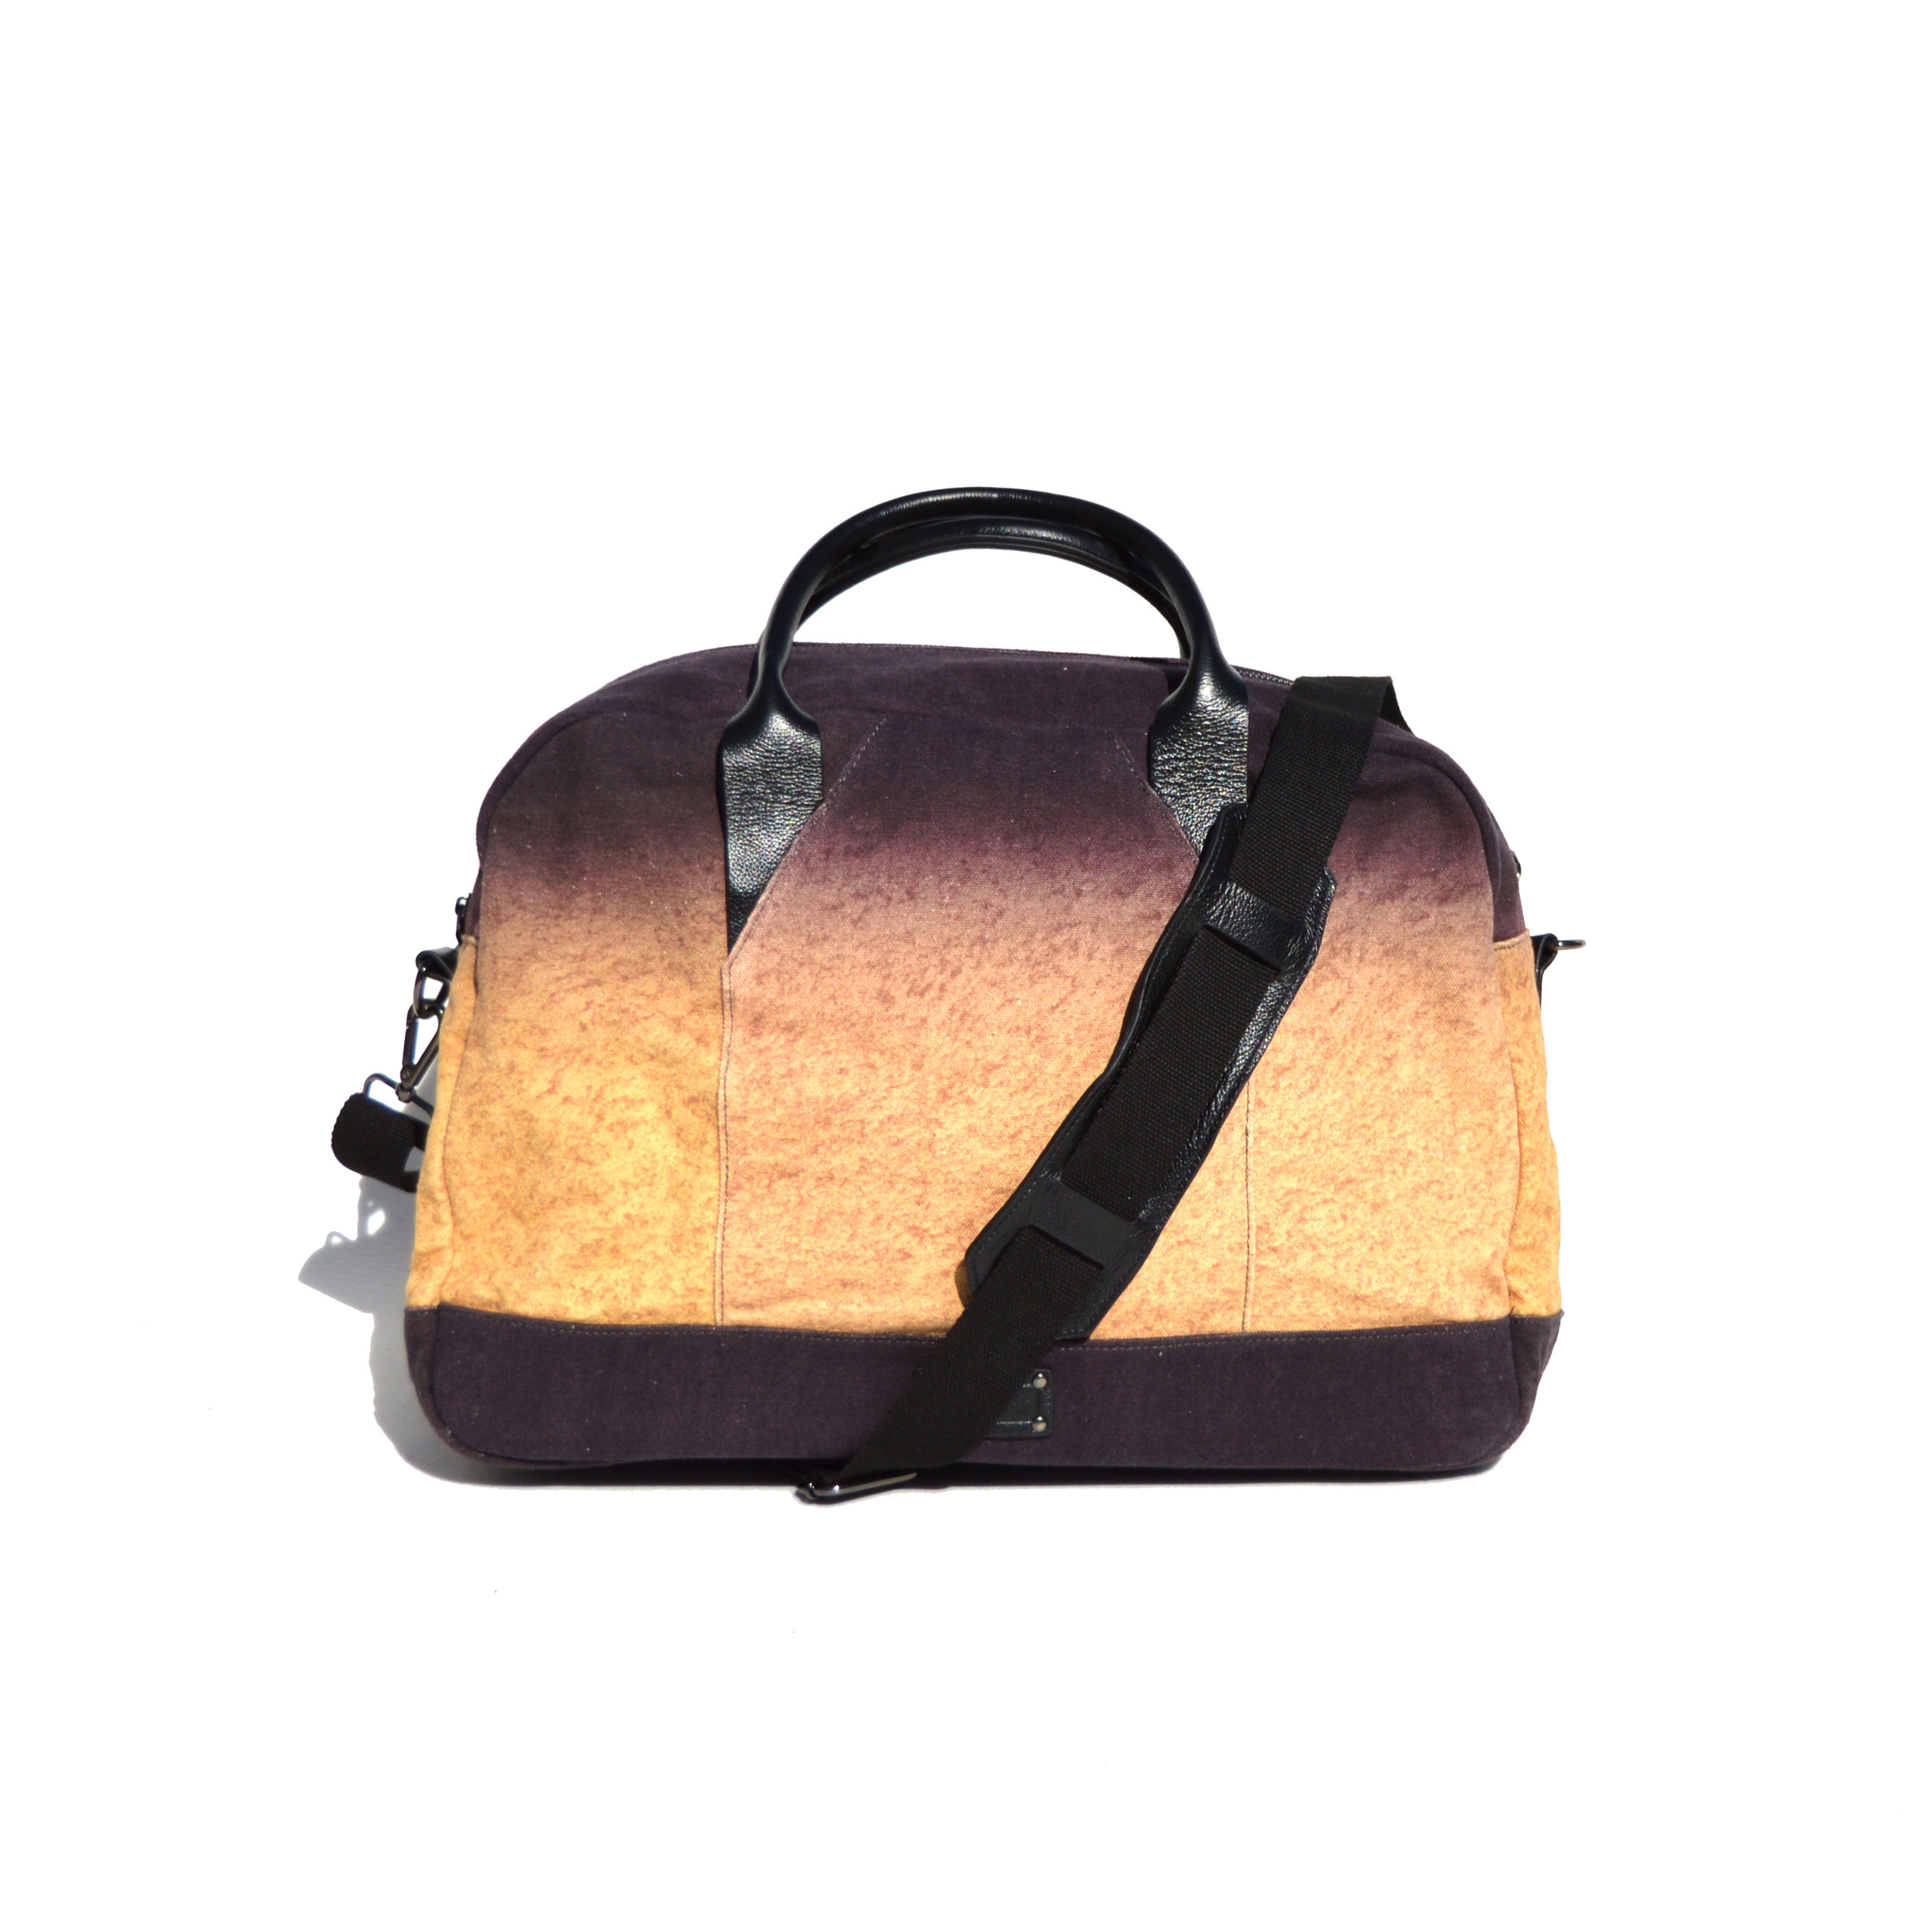 Ron Wan: Fashion collaboration with menswear label Krane Design on an Ombre bag collection